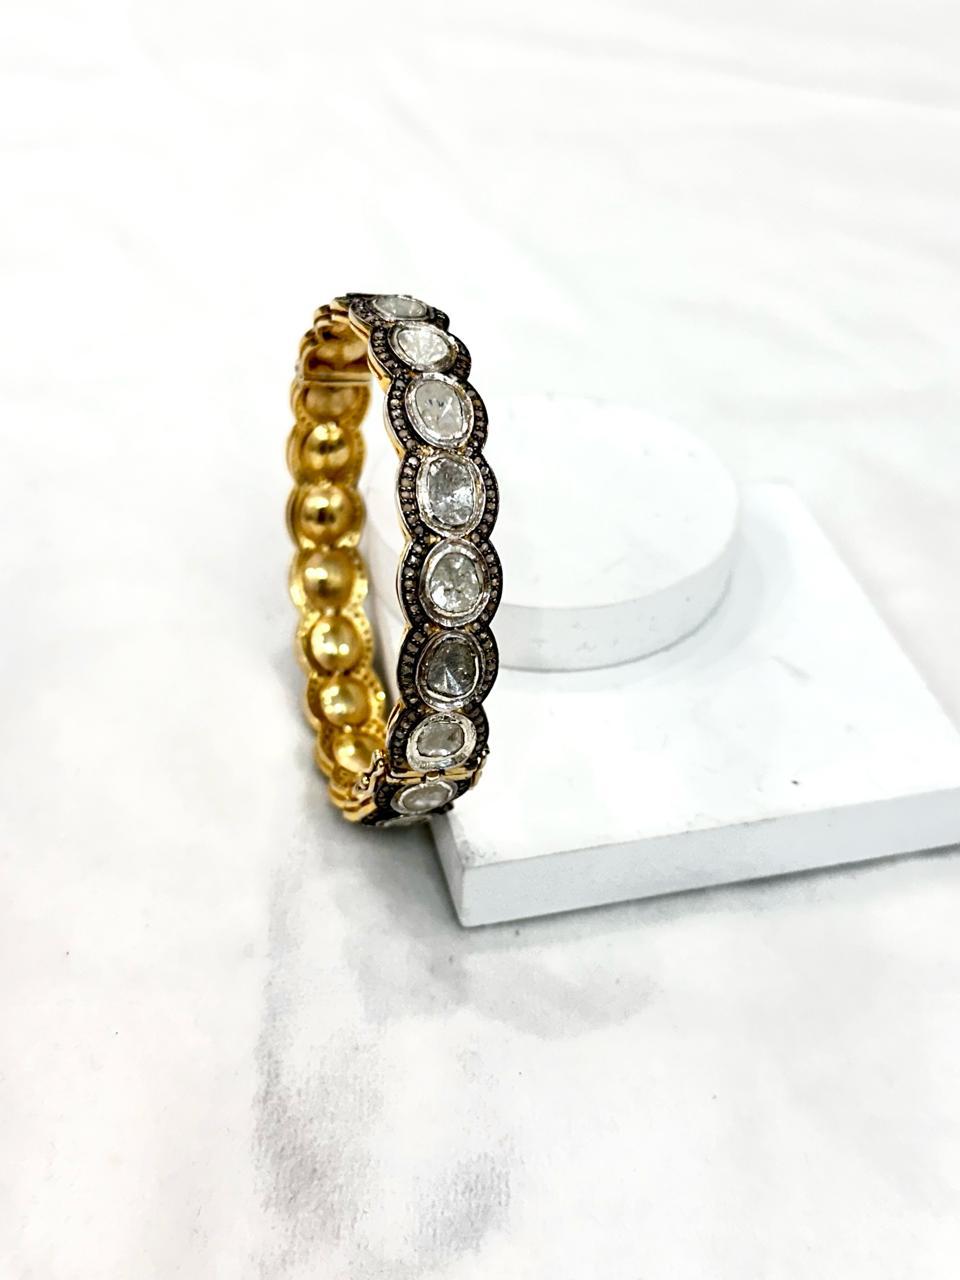 This vintage style diamond silver and yellow gold plating hinged bangle consists of:

Diamond- 7.50cts
Diamond type: Rose cut diamonds and uncut polki diamond
Diamond color:  white and tinted yellow
Diamond origin- Natural
Metal: Silver
Metal